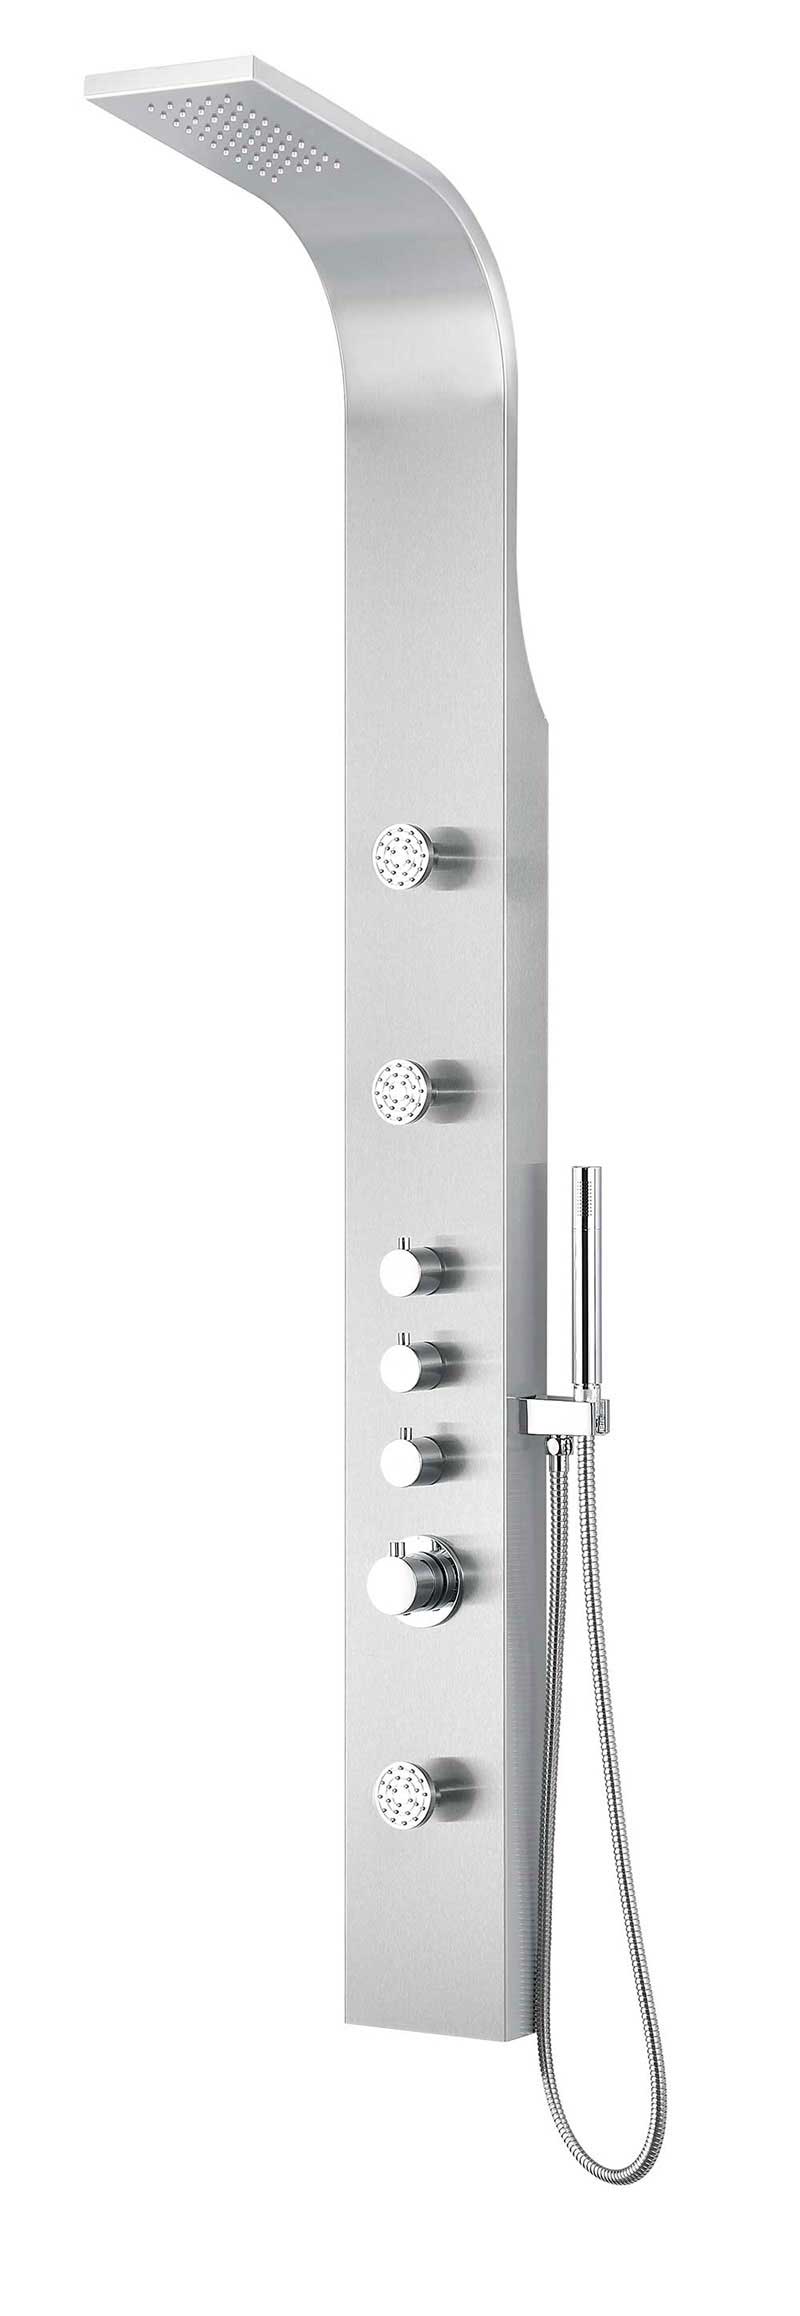 Anzzi STARLET Series 64 in. Full Body Shower Panel System with Heavy Rain Shower and Spray Wand in Brushed Steel